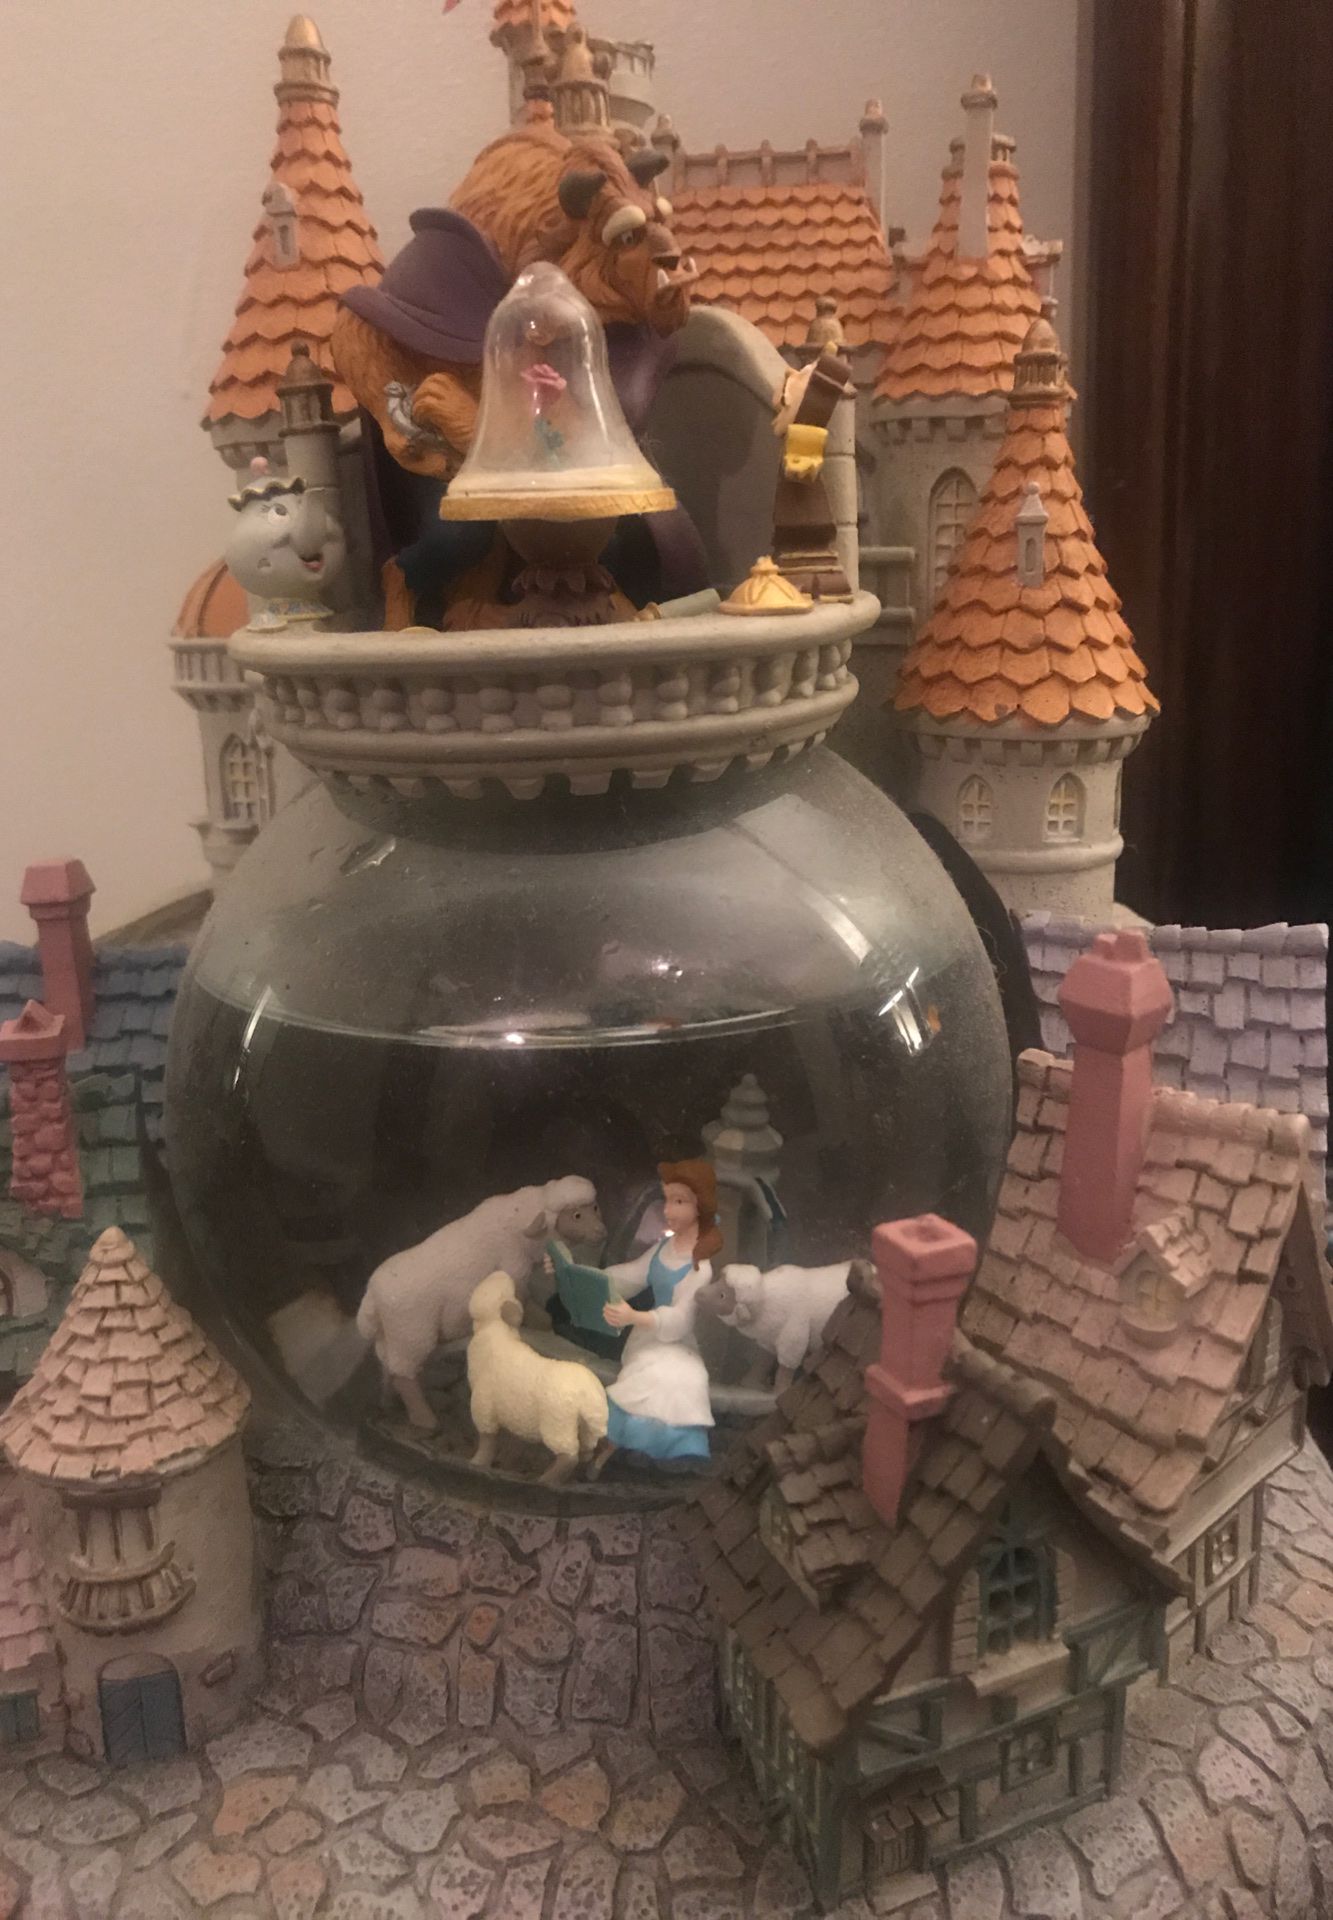 Beauty and the Beast Musical Snowglobe